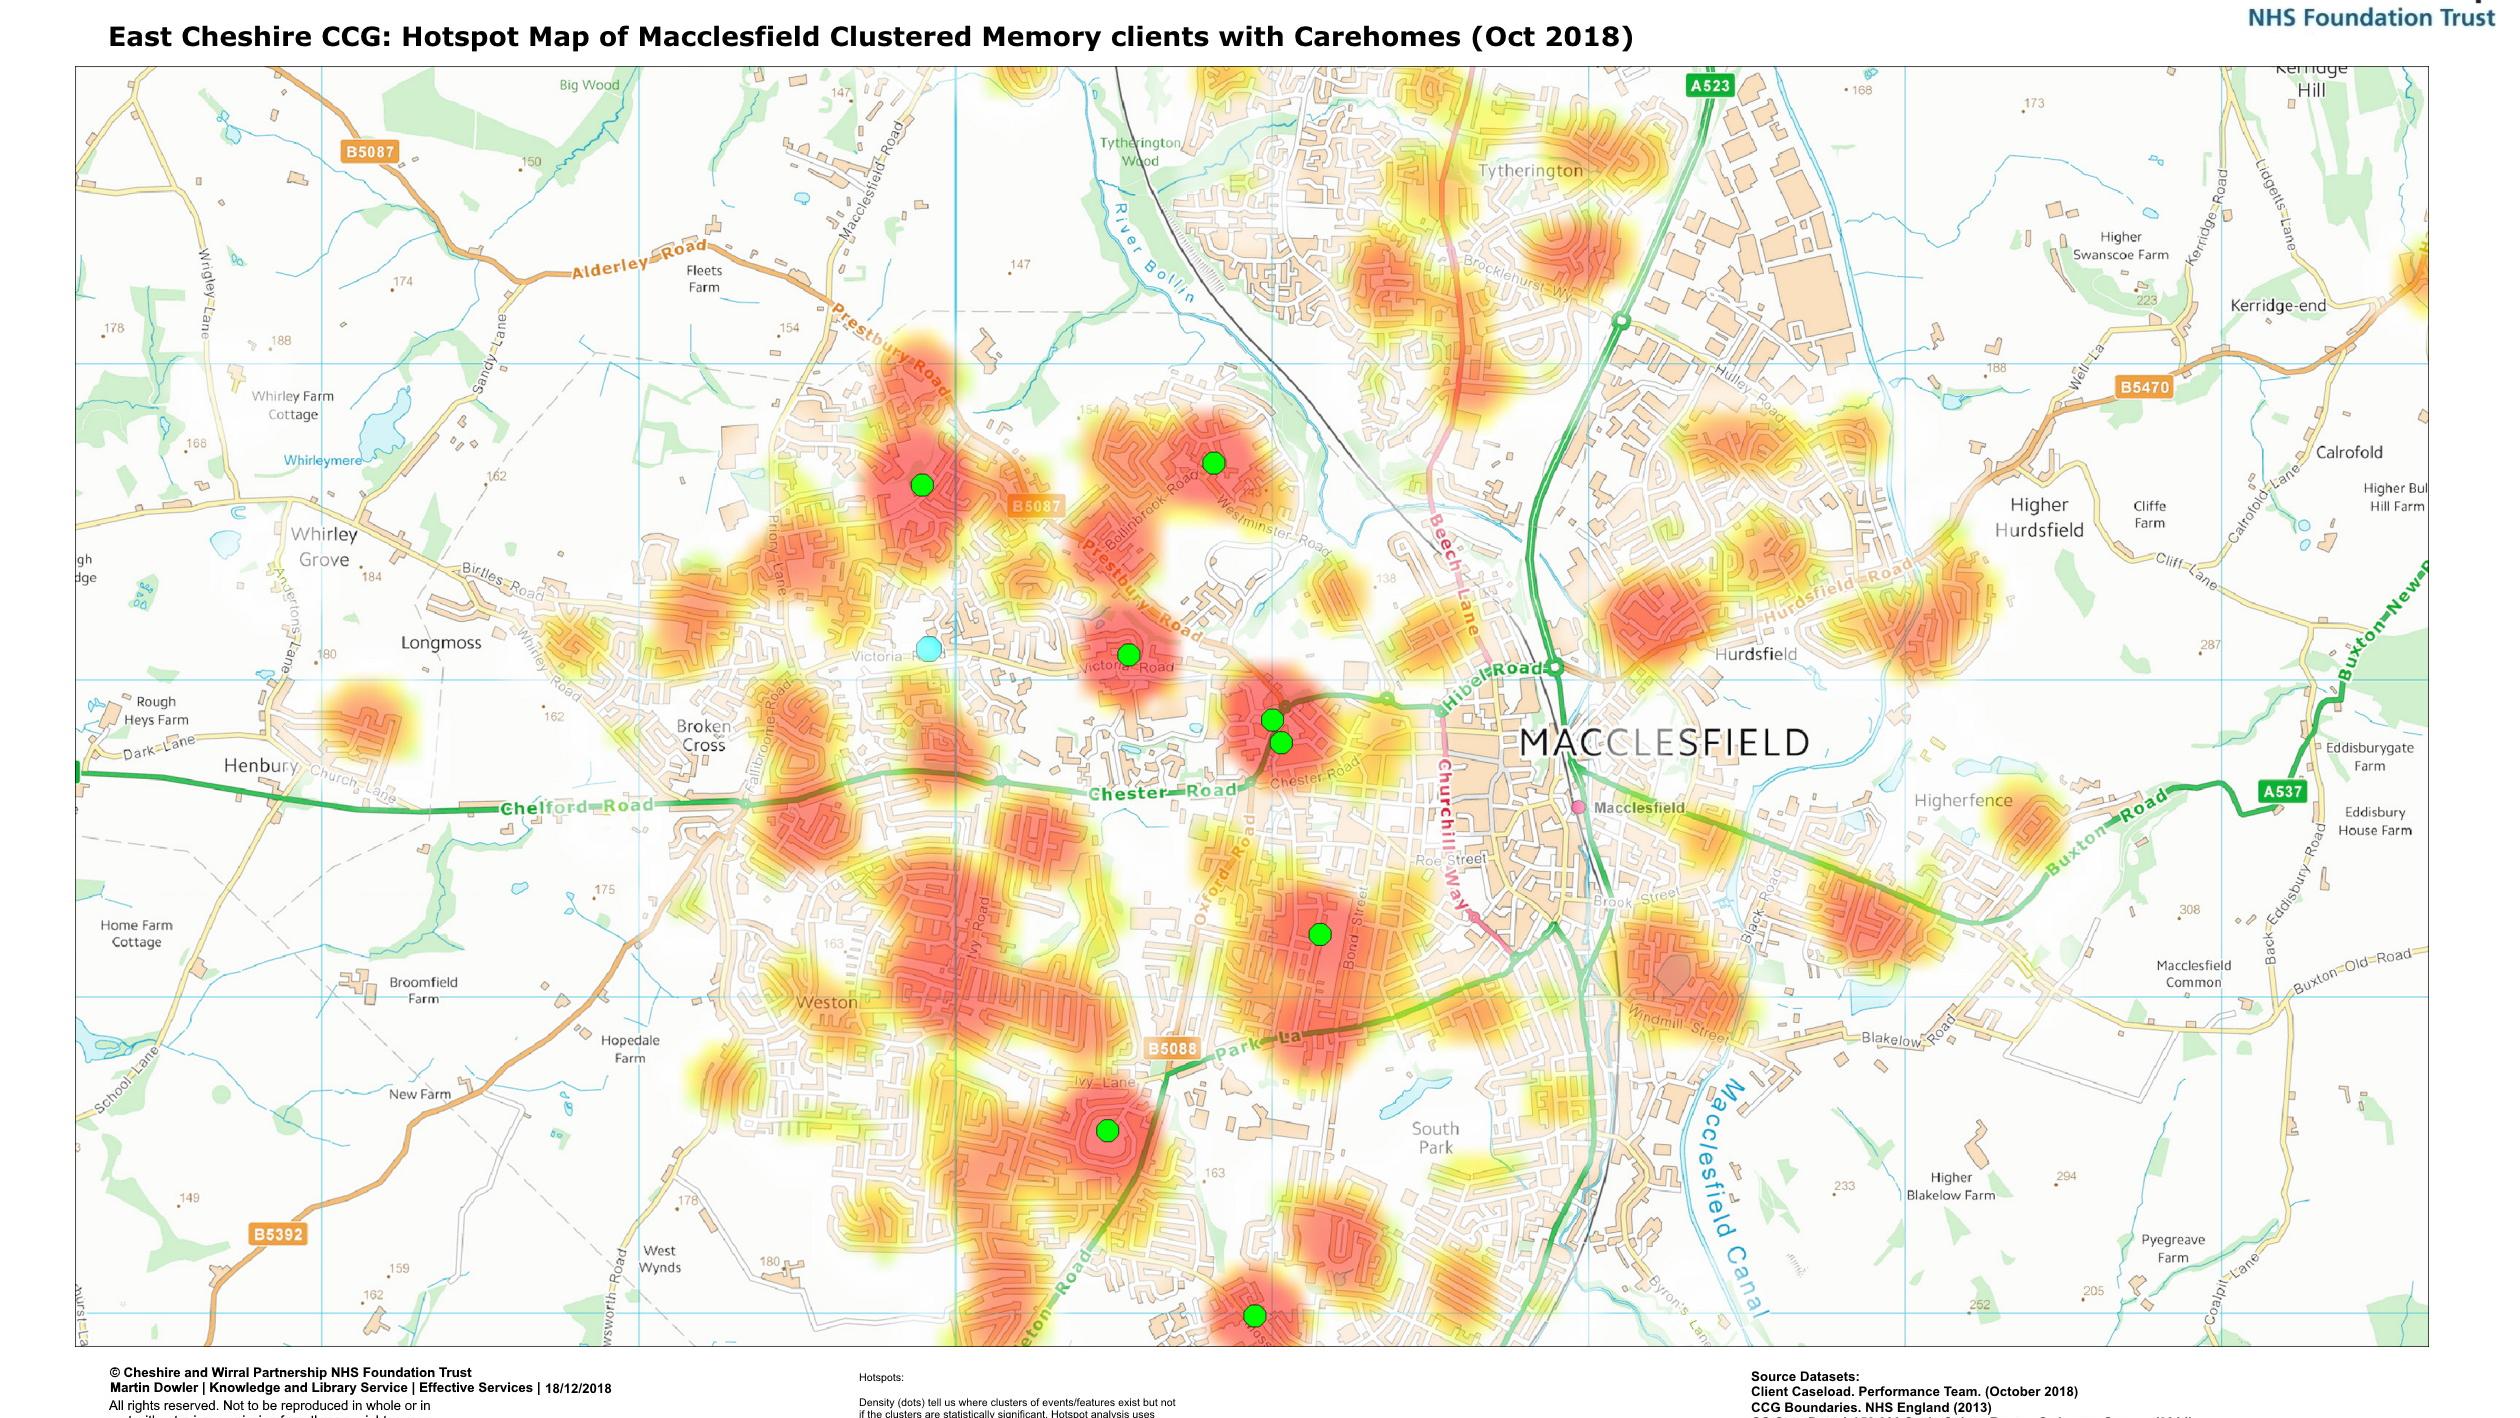 Map showing hotspots of Macclesfield clustered memory clients with care homes (October 2018)